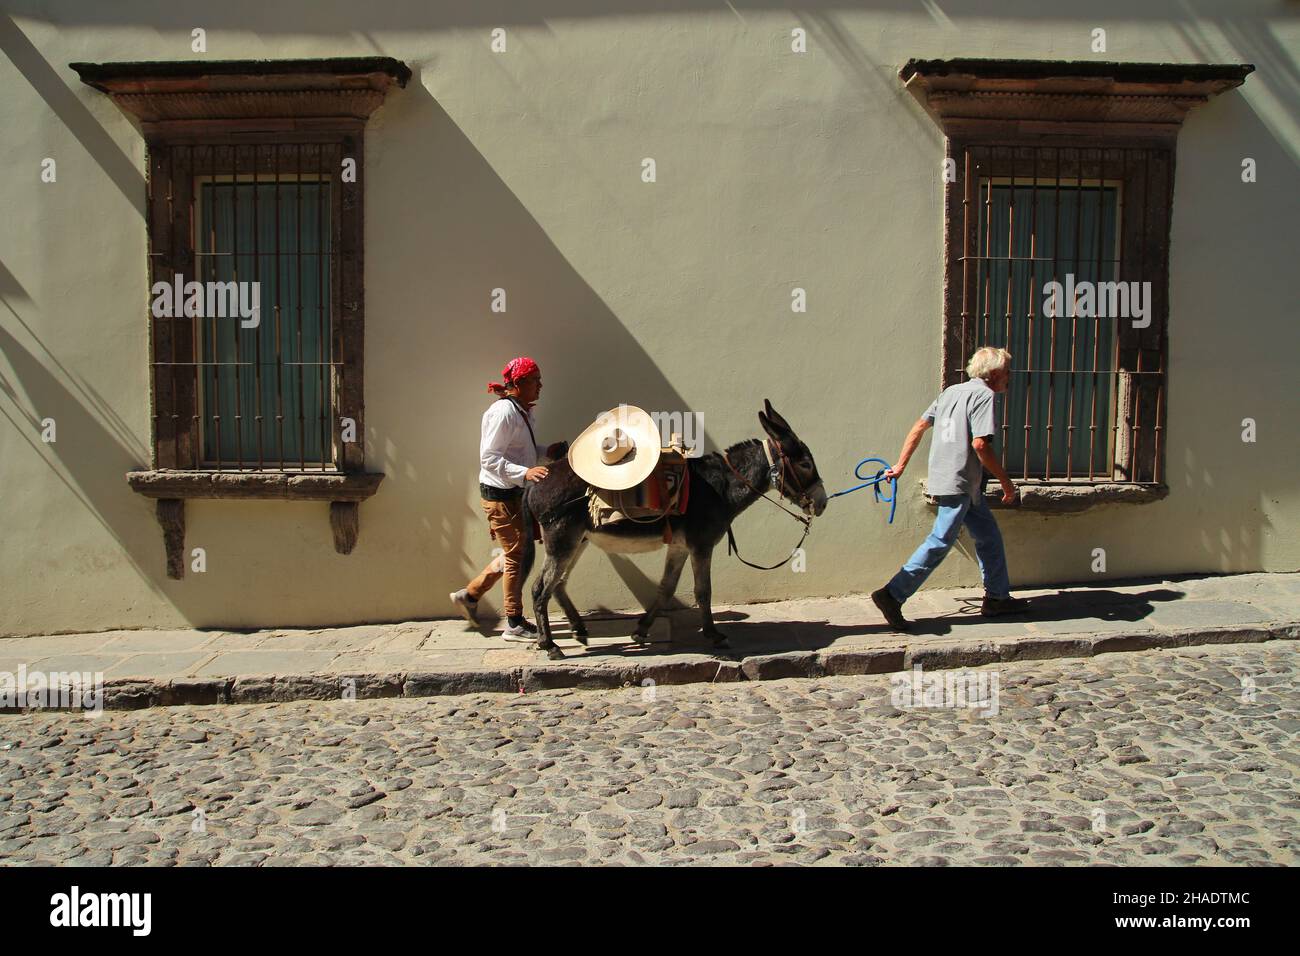 Two mexicans are pulling a donkey in the street of San Miguel de Allende in Guanajuato, Mexico. Stock Photo